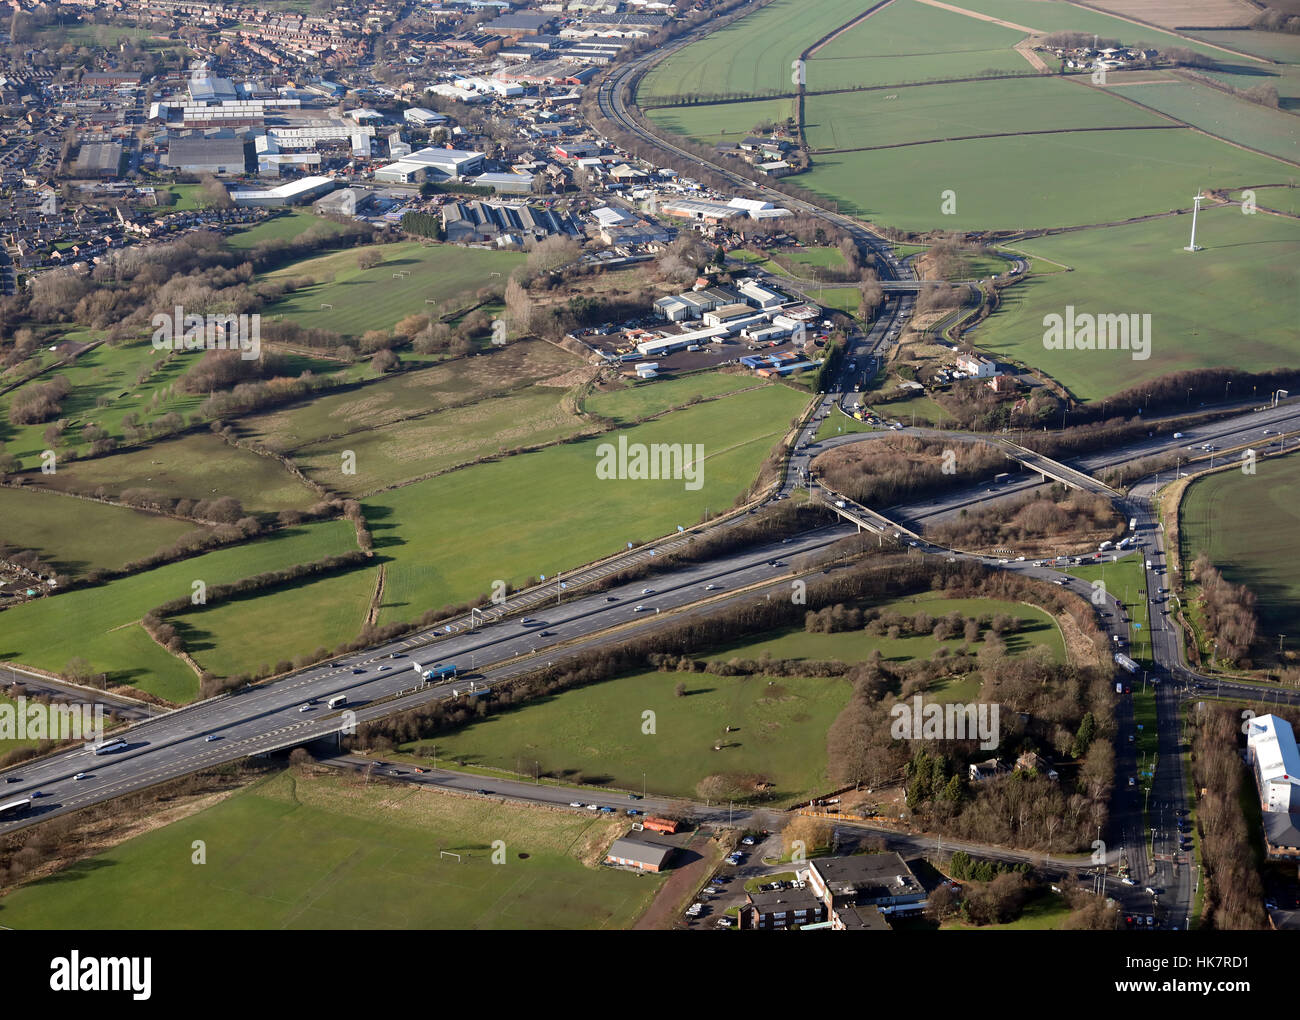 https://c8.alamy.com/comp/HK7RD1/aerial-view-of-junction-40-of-the-m1-at-ossett-near-wakefield-west-HK7RD1.jpg